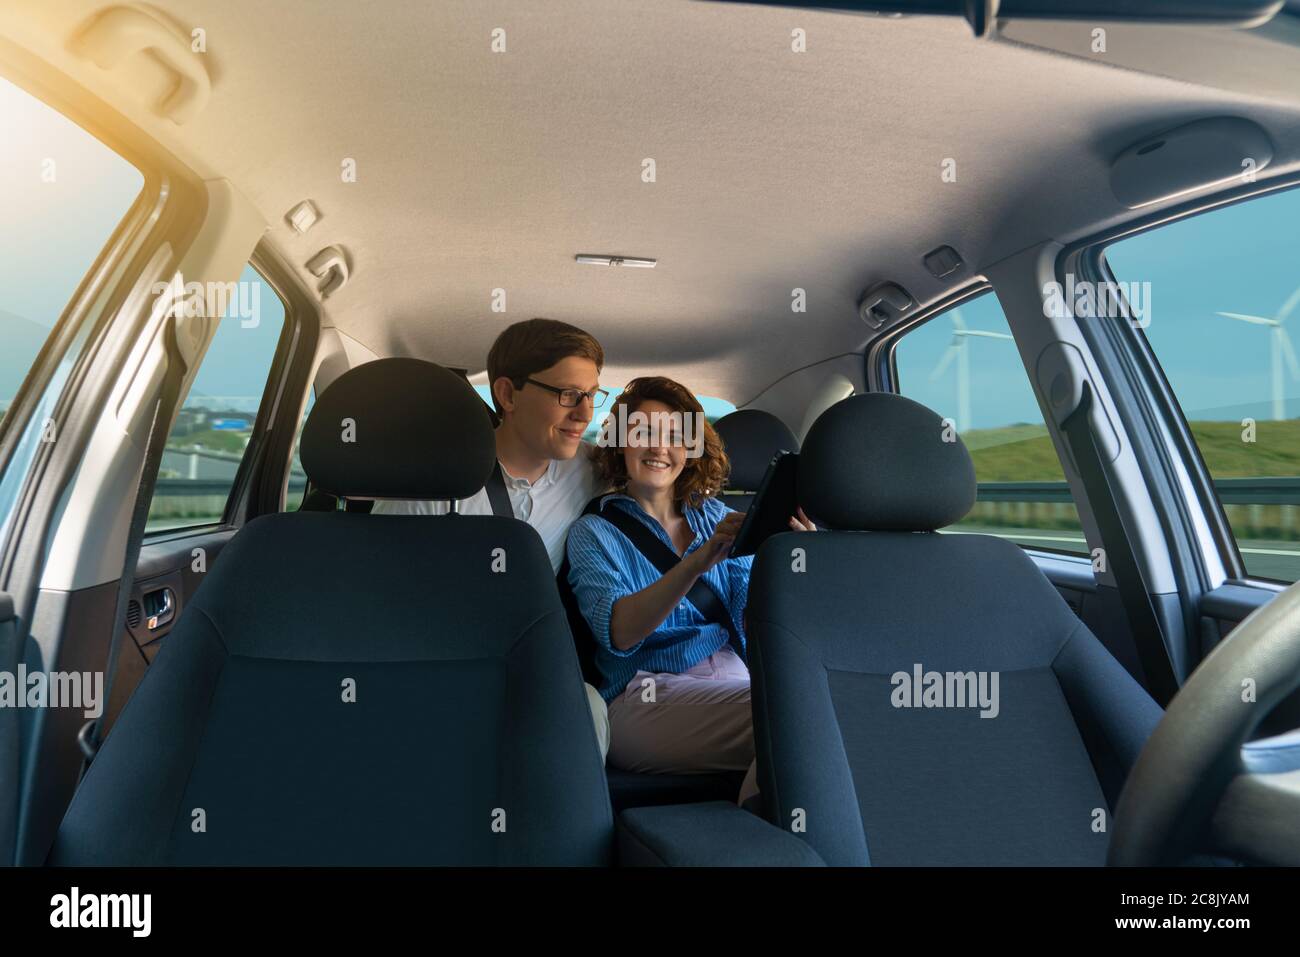 Passengers sit in the back seat and look at the digital tablet while self-driving car rides on the highway. Stock Photo